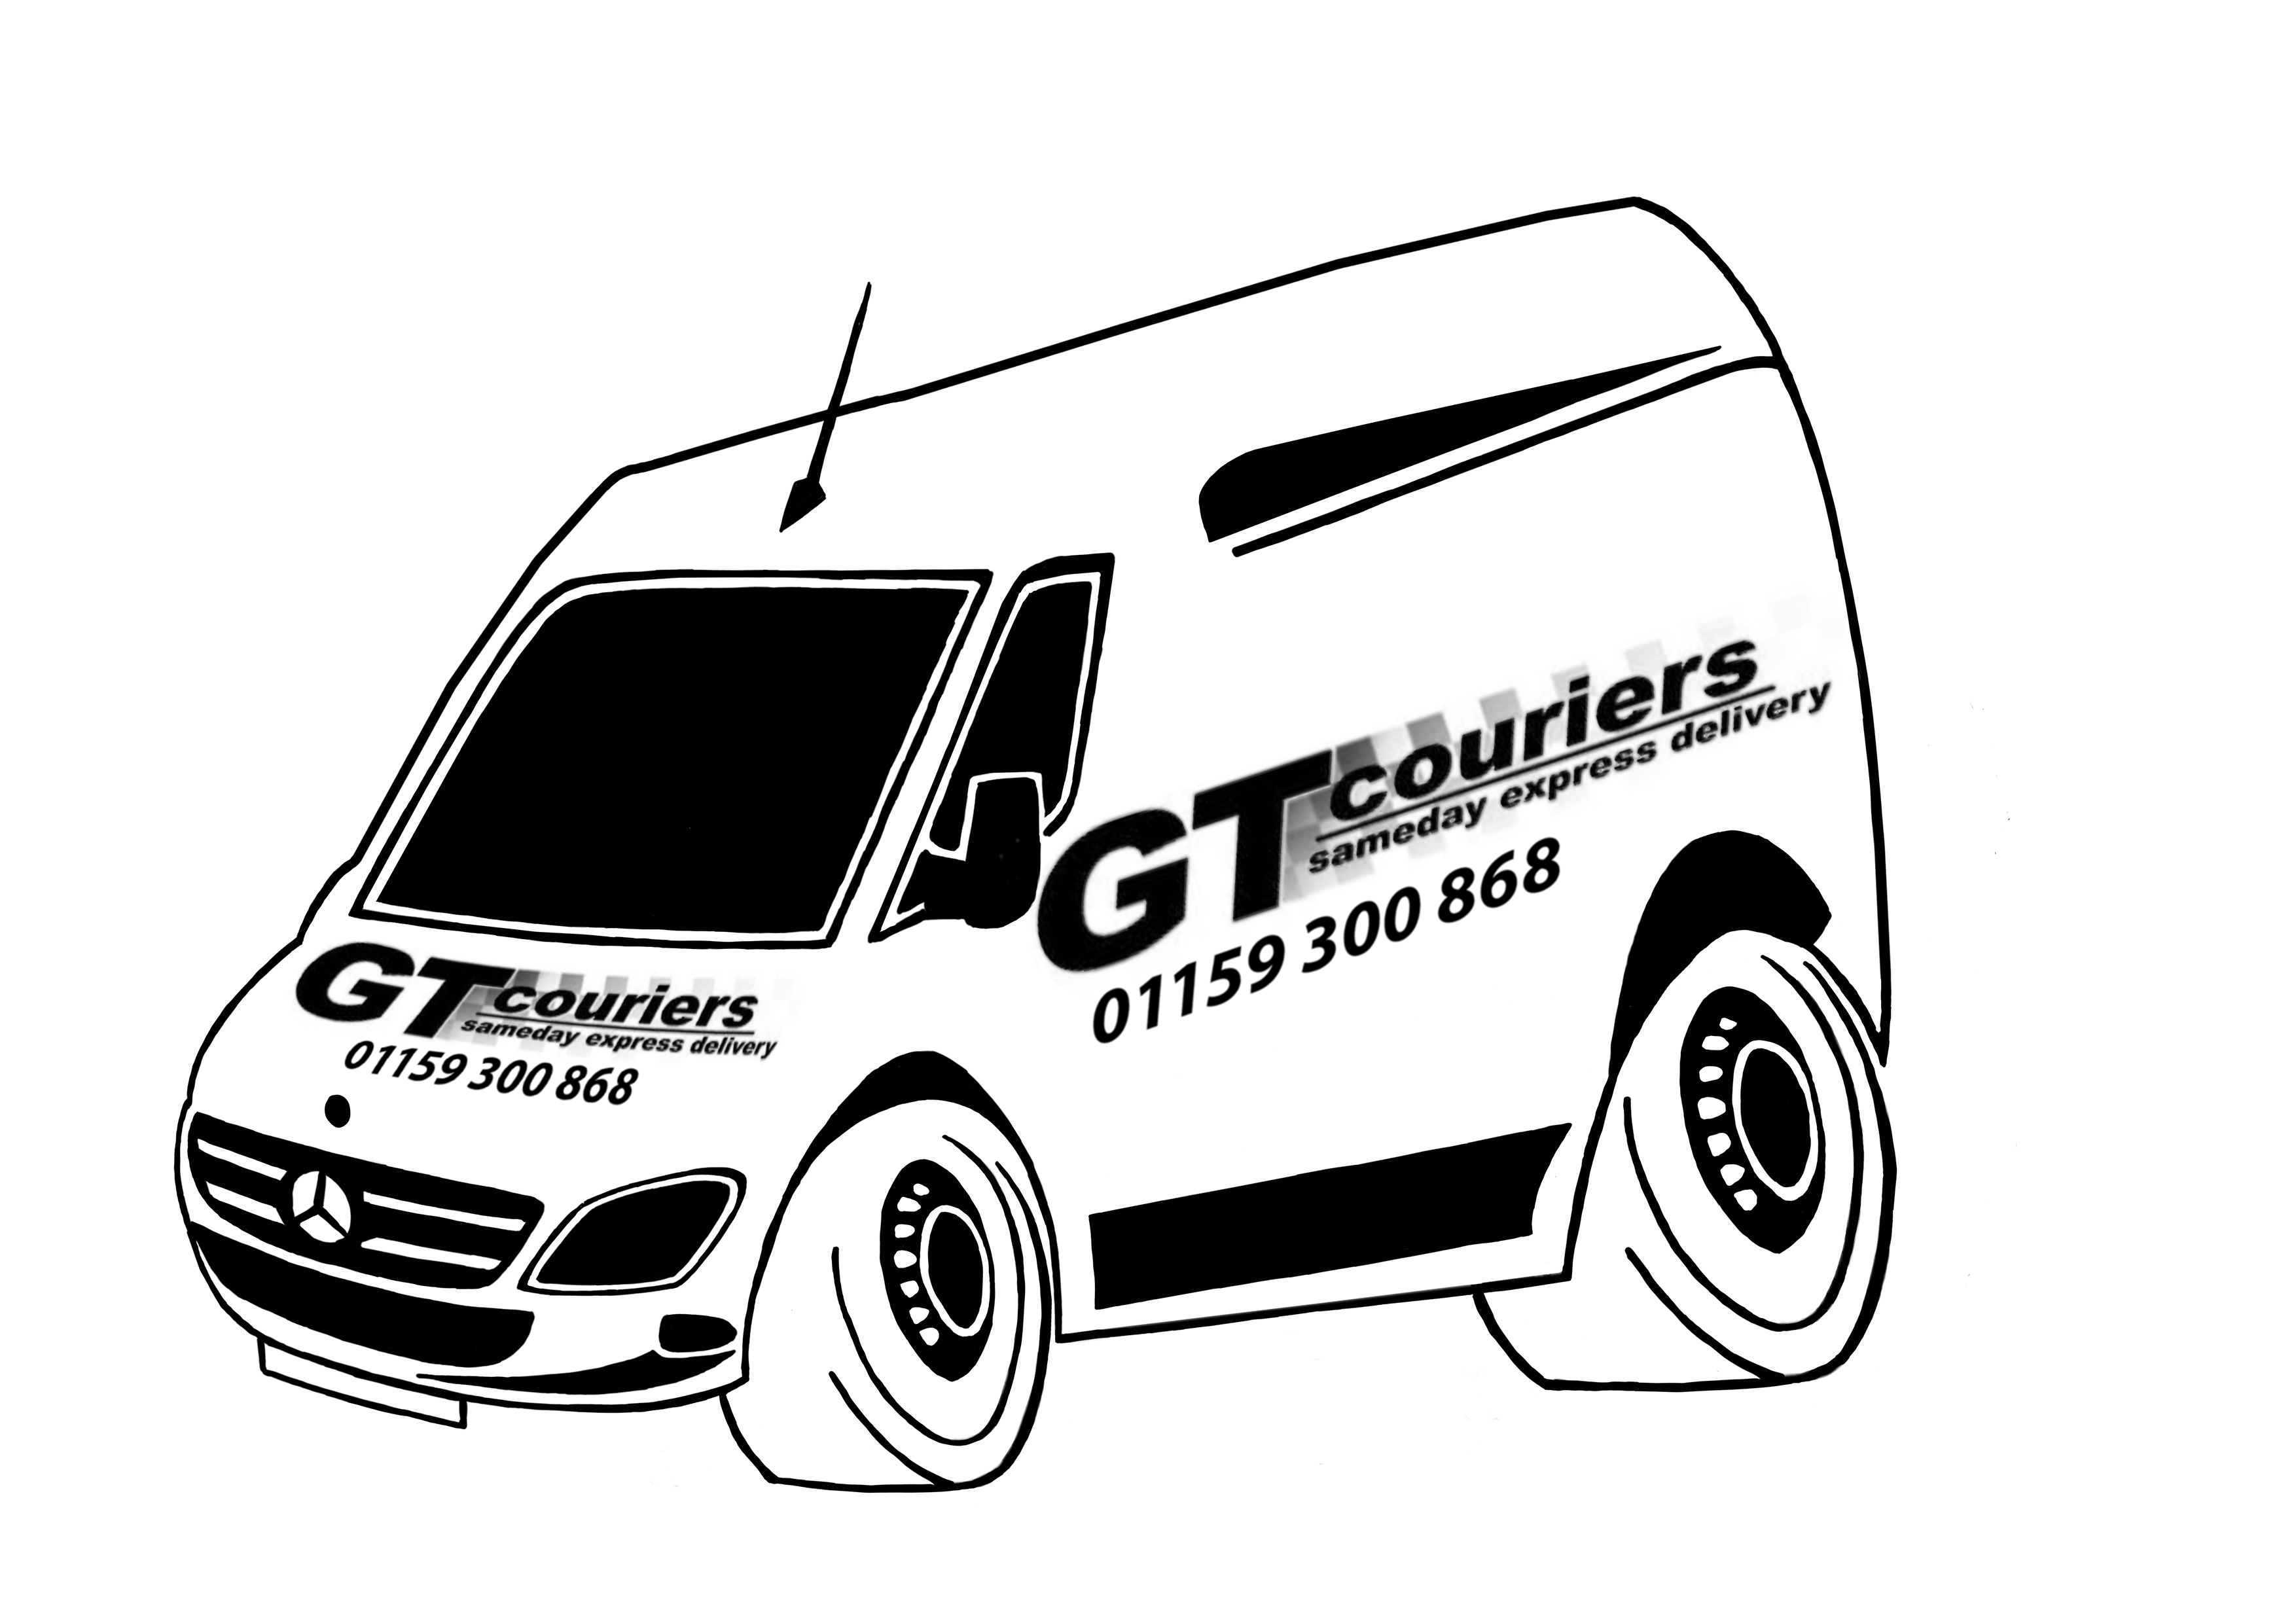 Logo of GT Couriers UK lTD